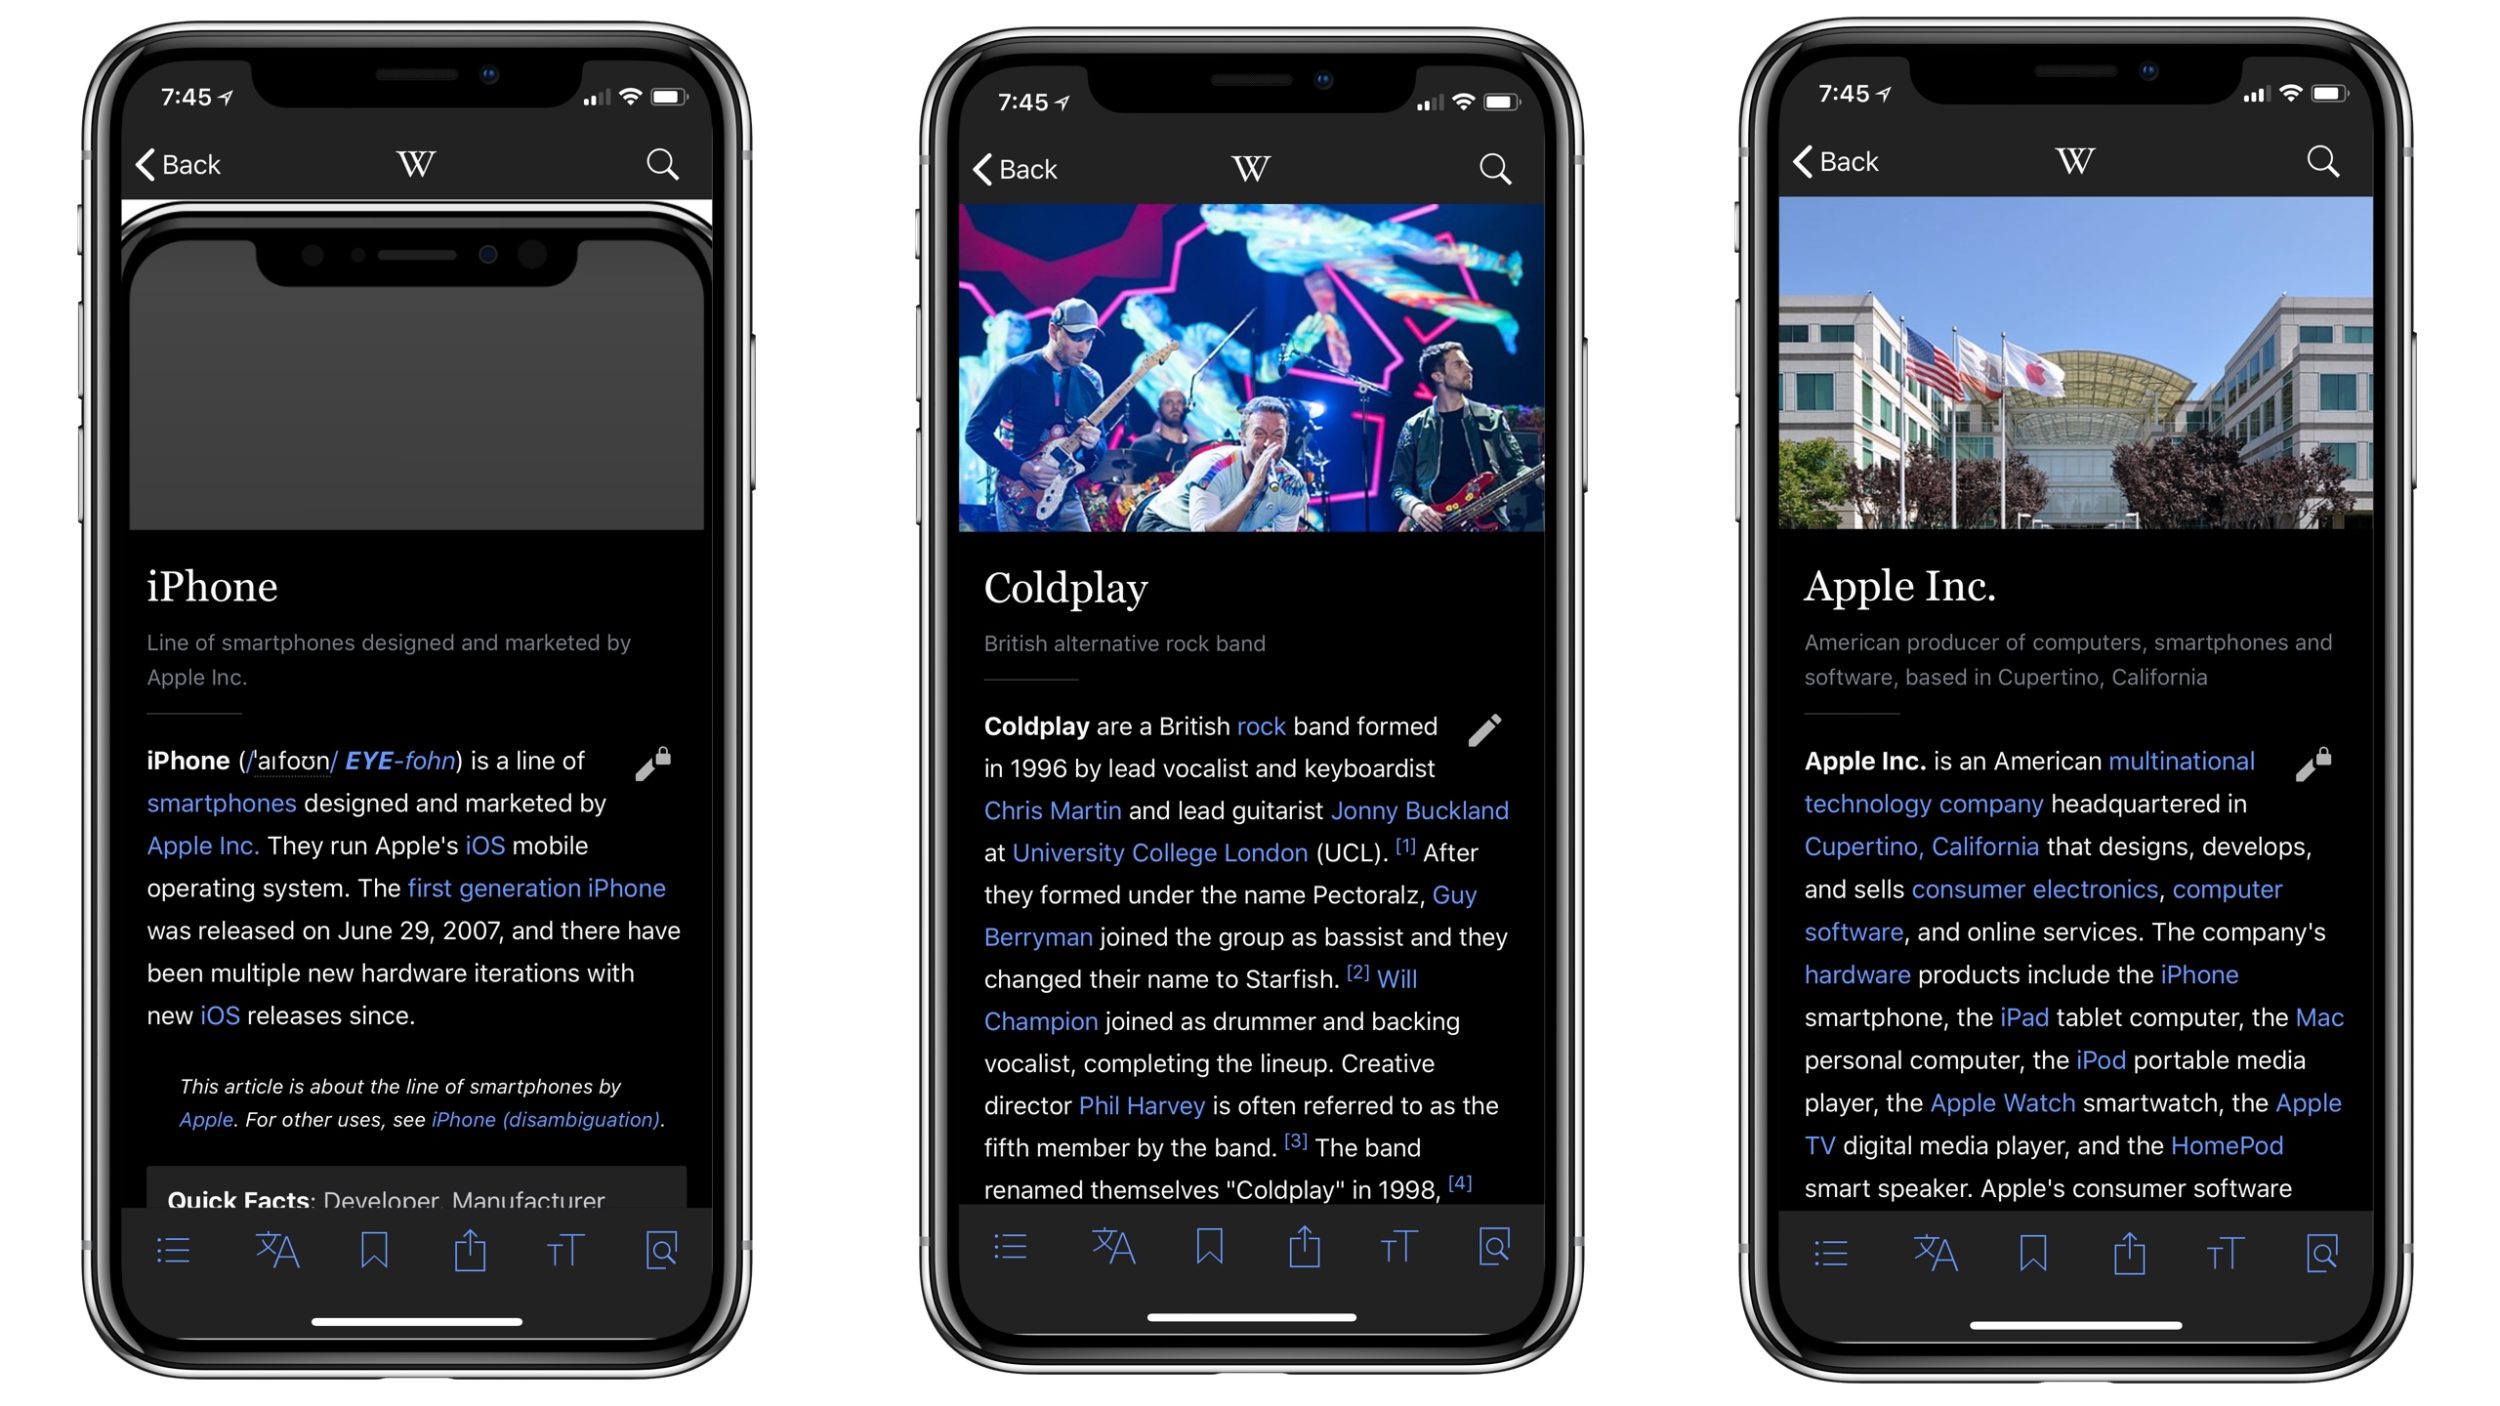 Wikipedia for iOS Adds New Black Mode for iPhone X’s OLED Display